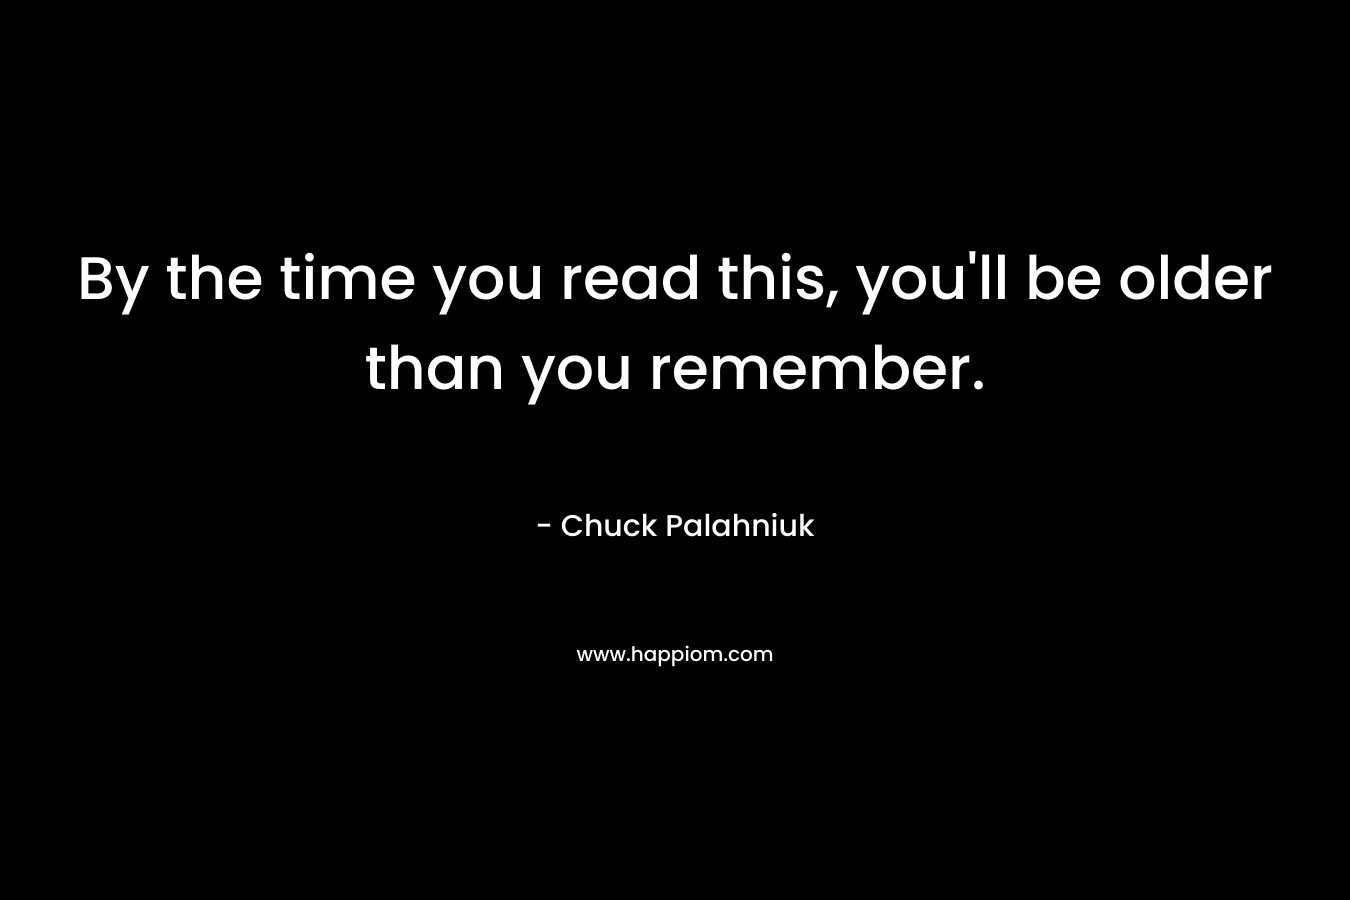 By the time you read this, you'll be older than you remember.